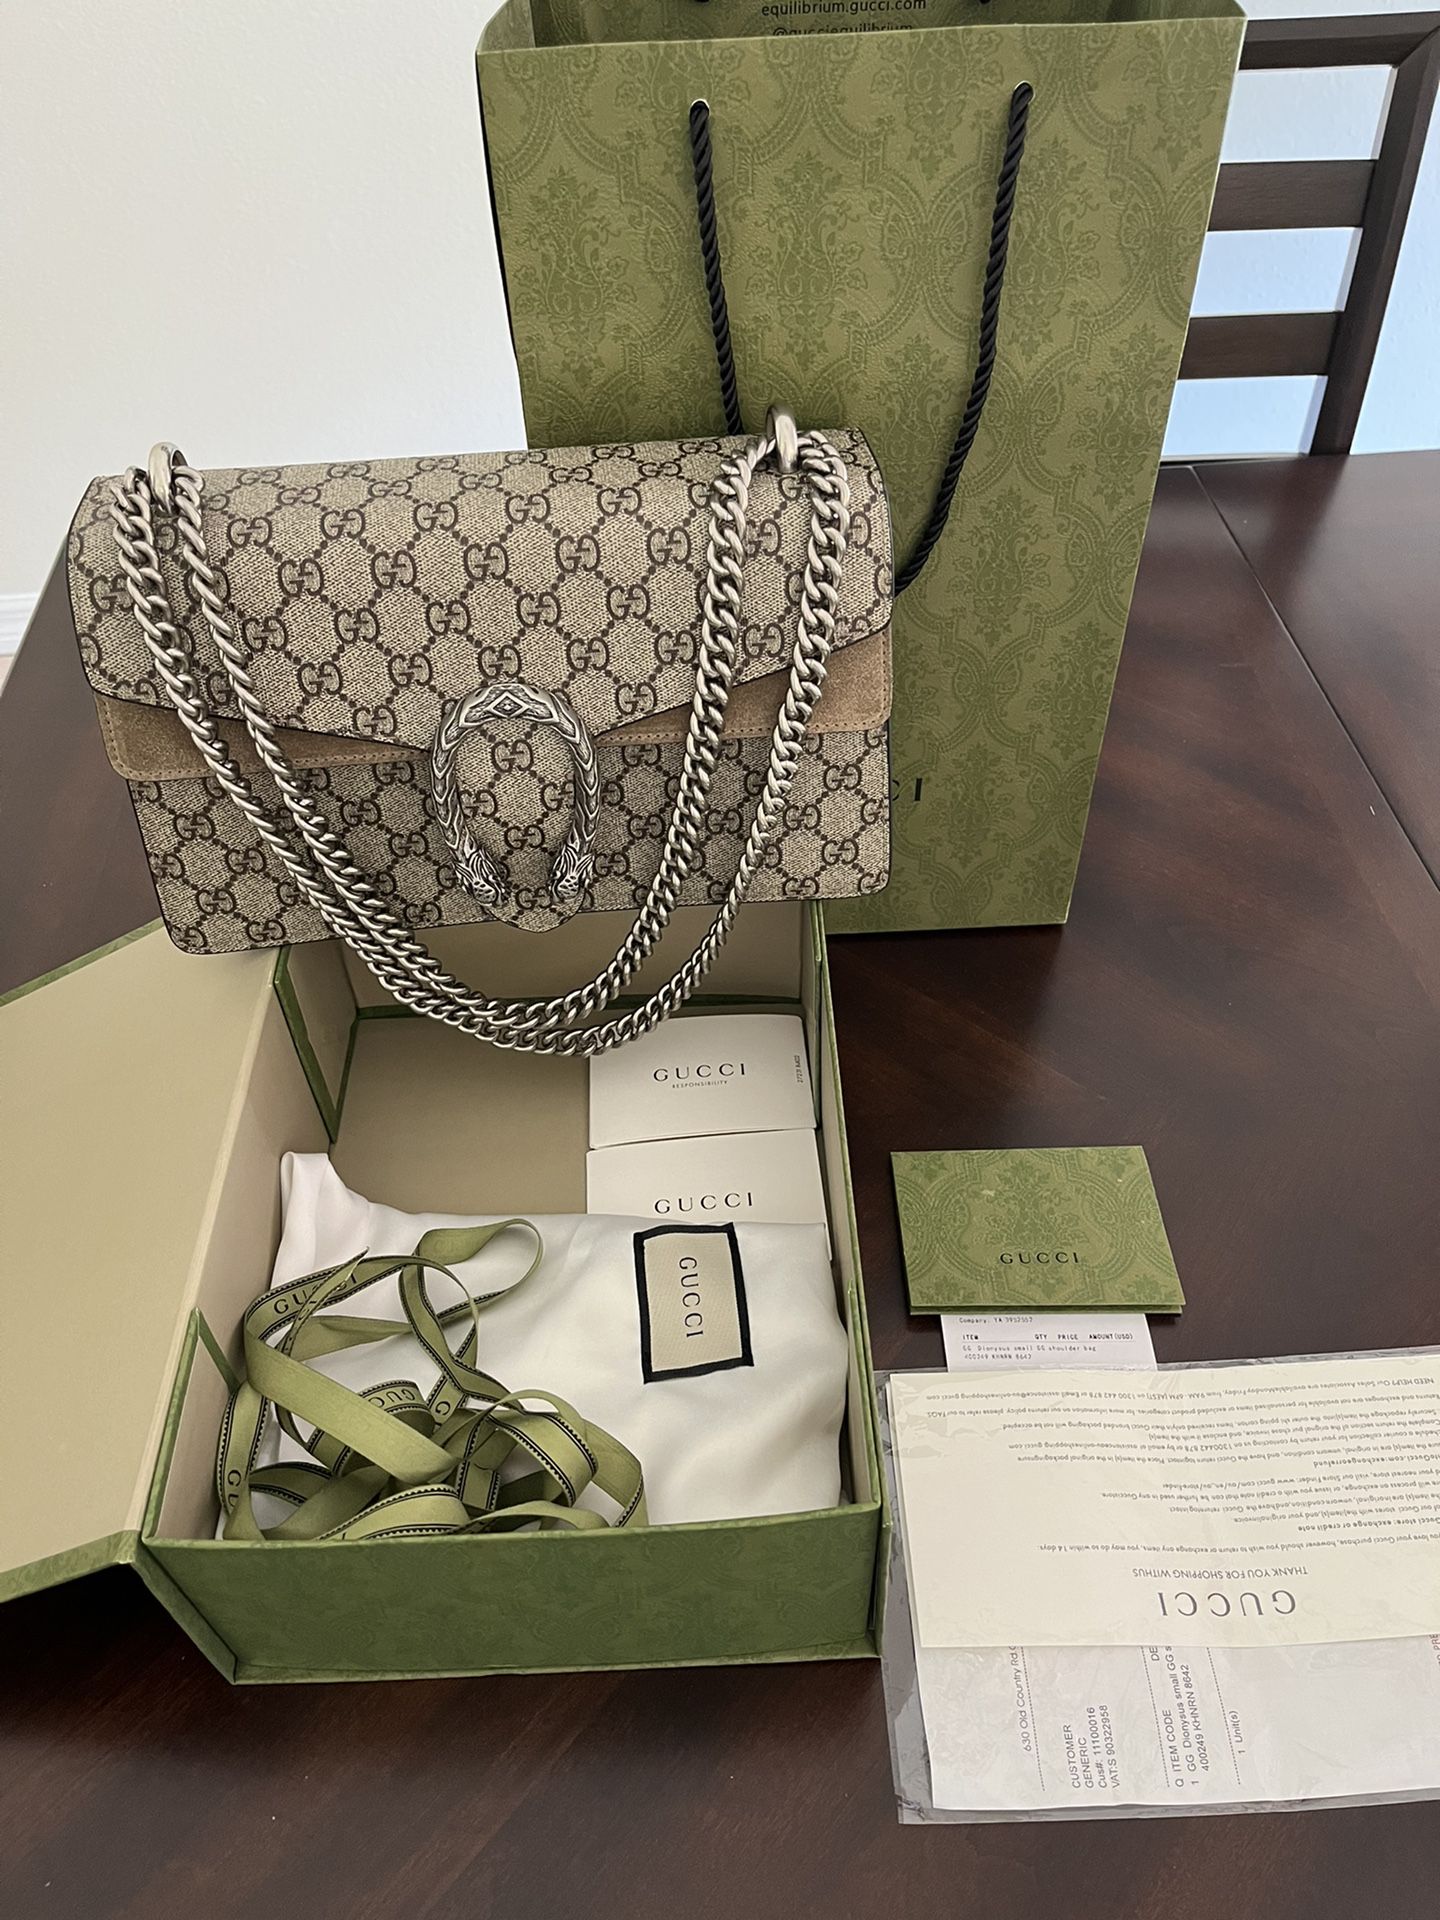 Gucci, Bags, Authentic Gucci Box And Shopping Bag